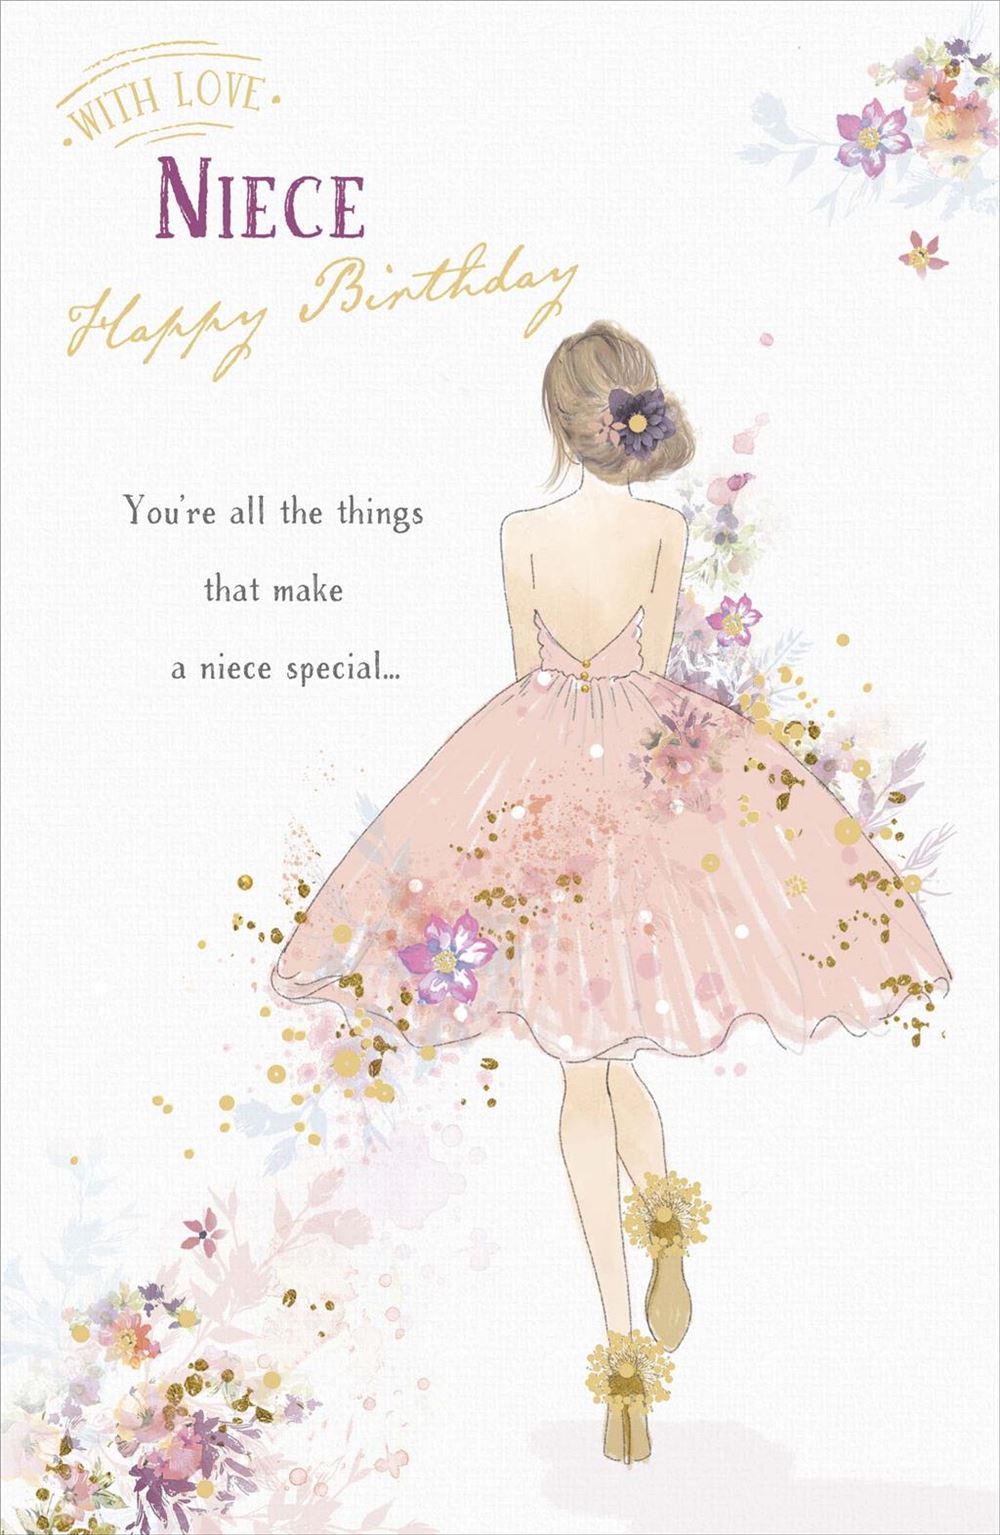 Niece Birthday Card - Delicate - Featured Beautiful and Feminine